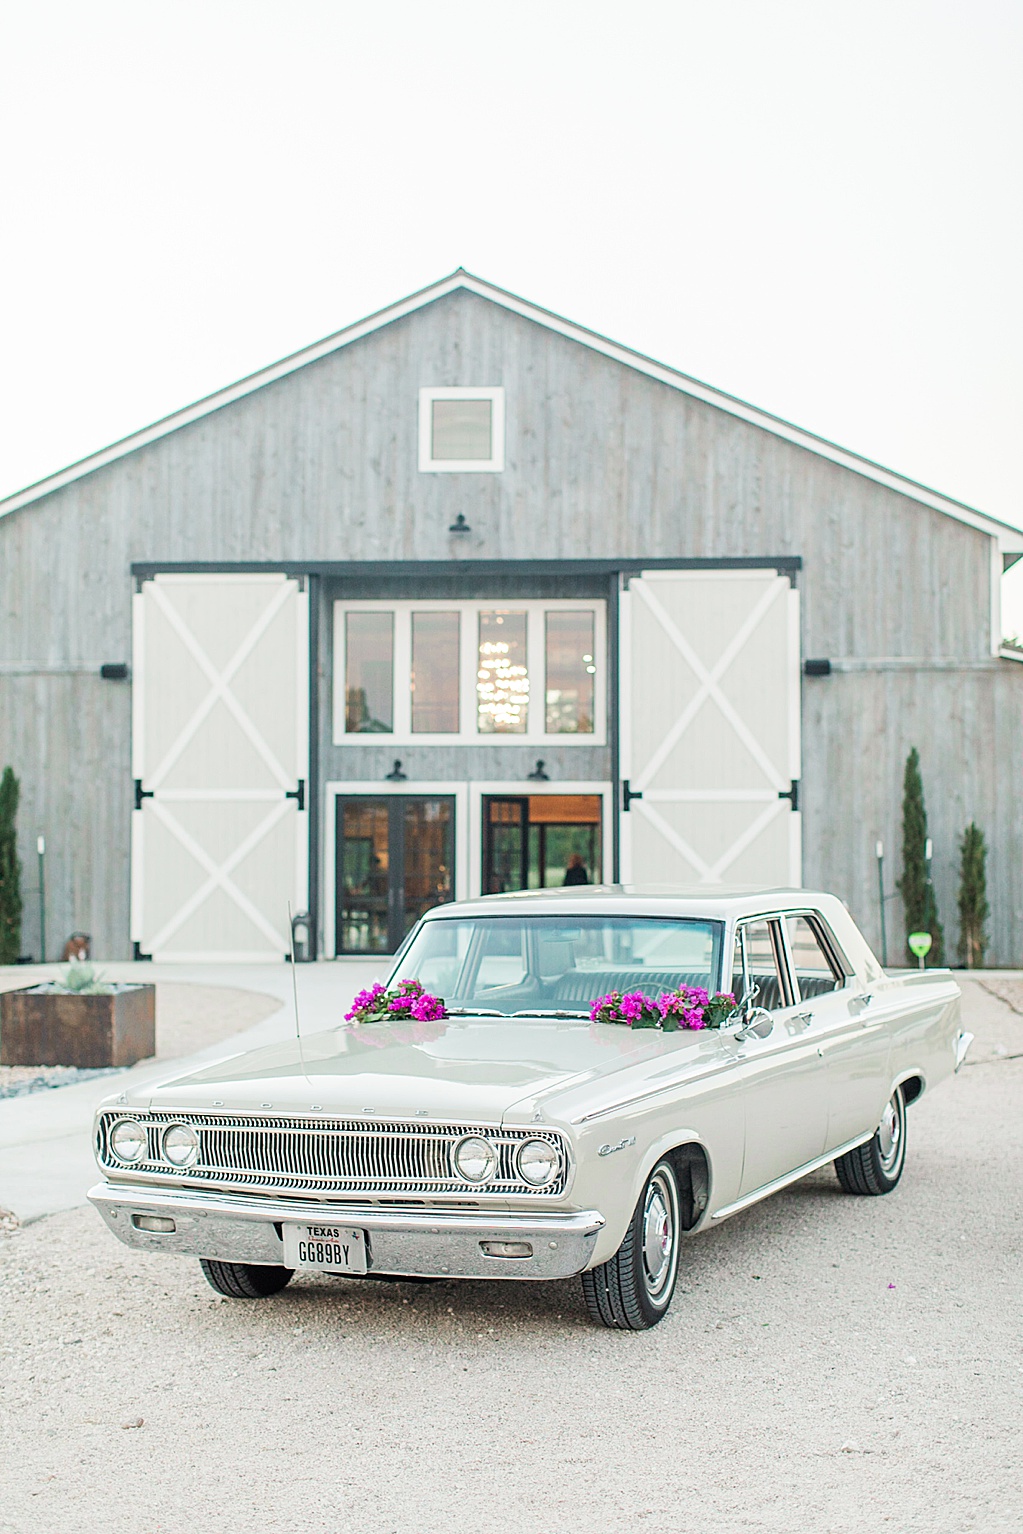 the barn at swallows eve wedding venue in fredericksburg texas photo inspiration featured on Grey Likes Weddings 0038